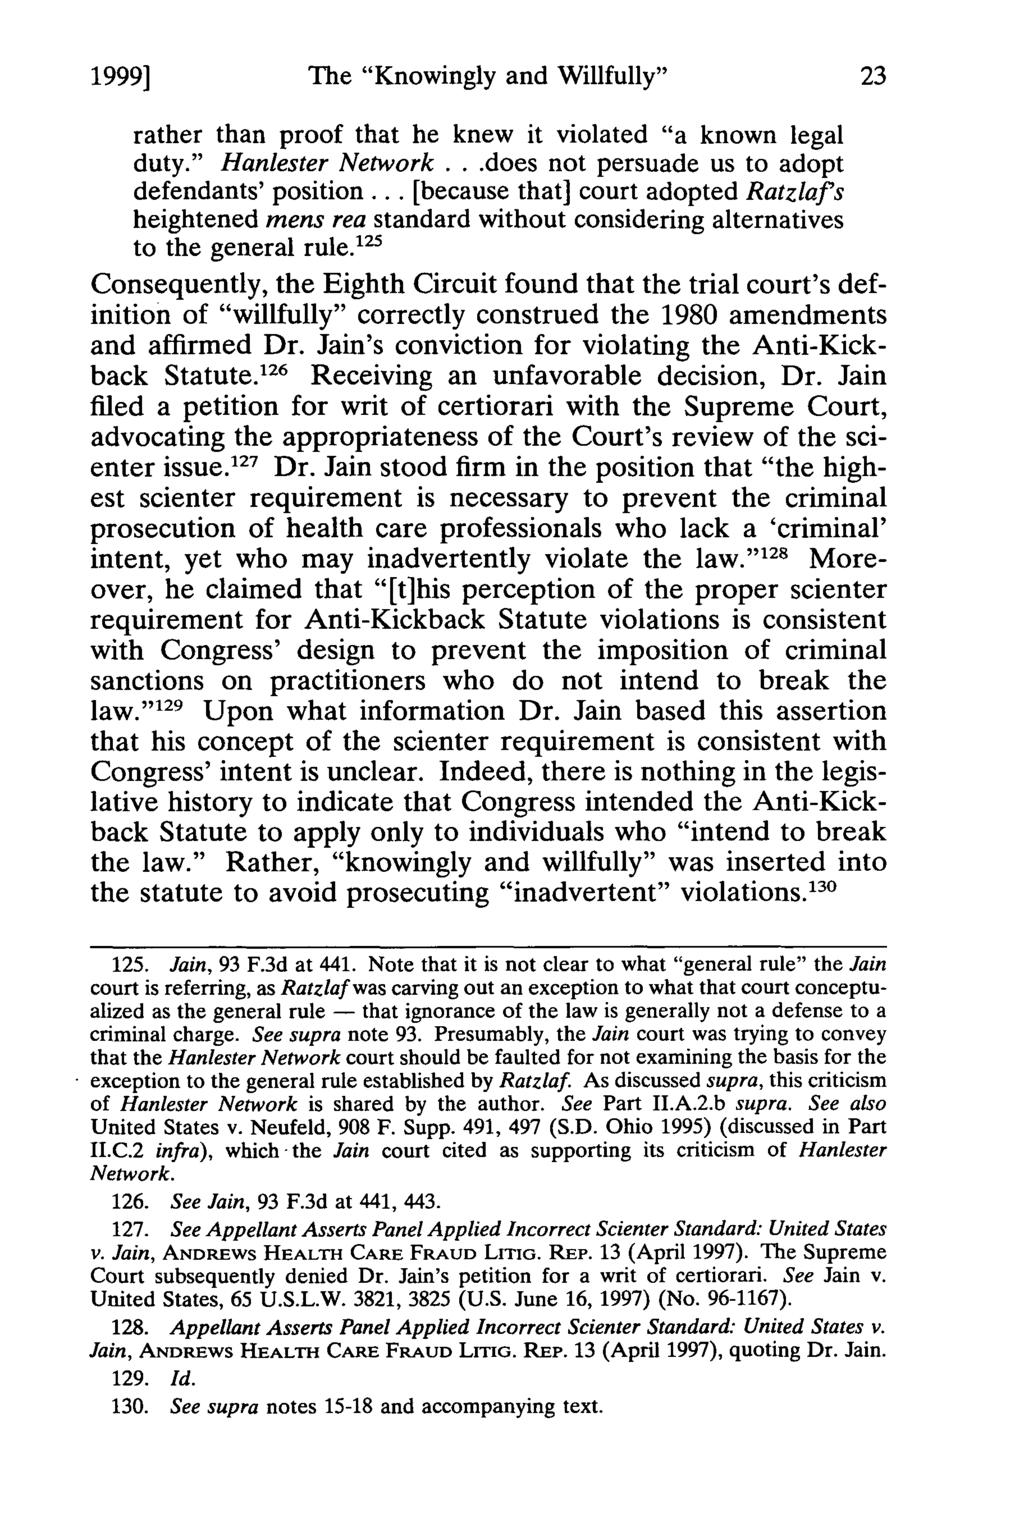 1999] Blair: The "Knowingly and Willfully" Continuum of the Anti-Kickback Stat The "Knowingly and Willfully" rather than proof that he knew it violated "a known legal duty." Hanlester Network.